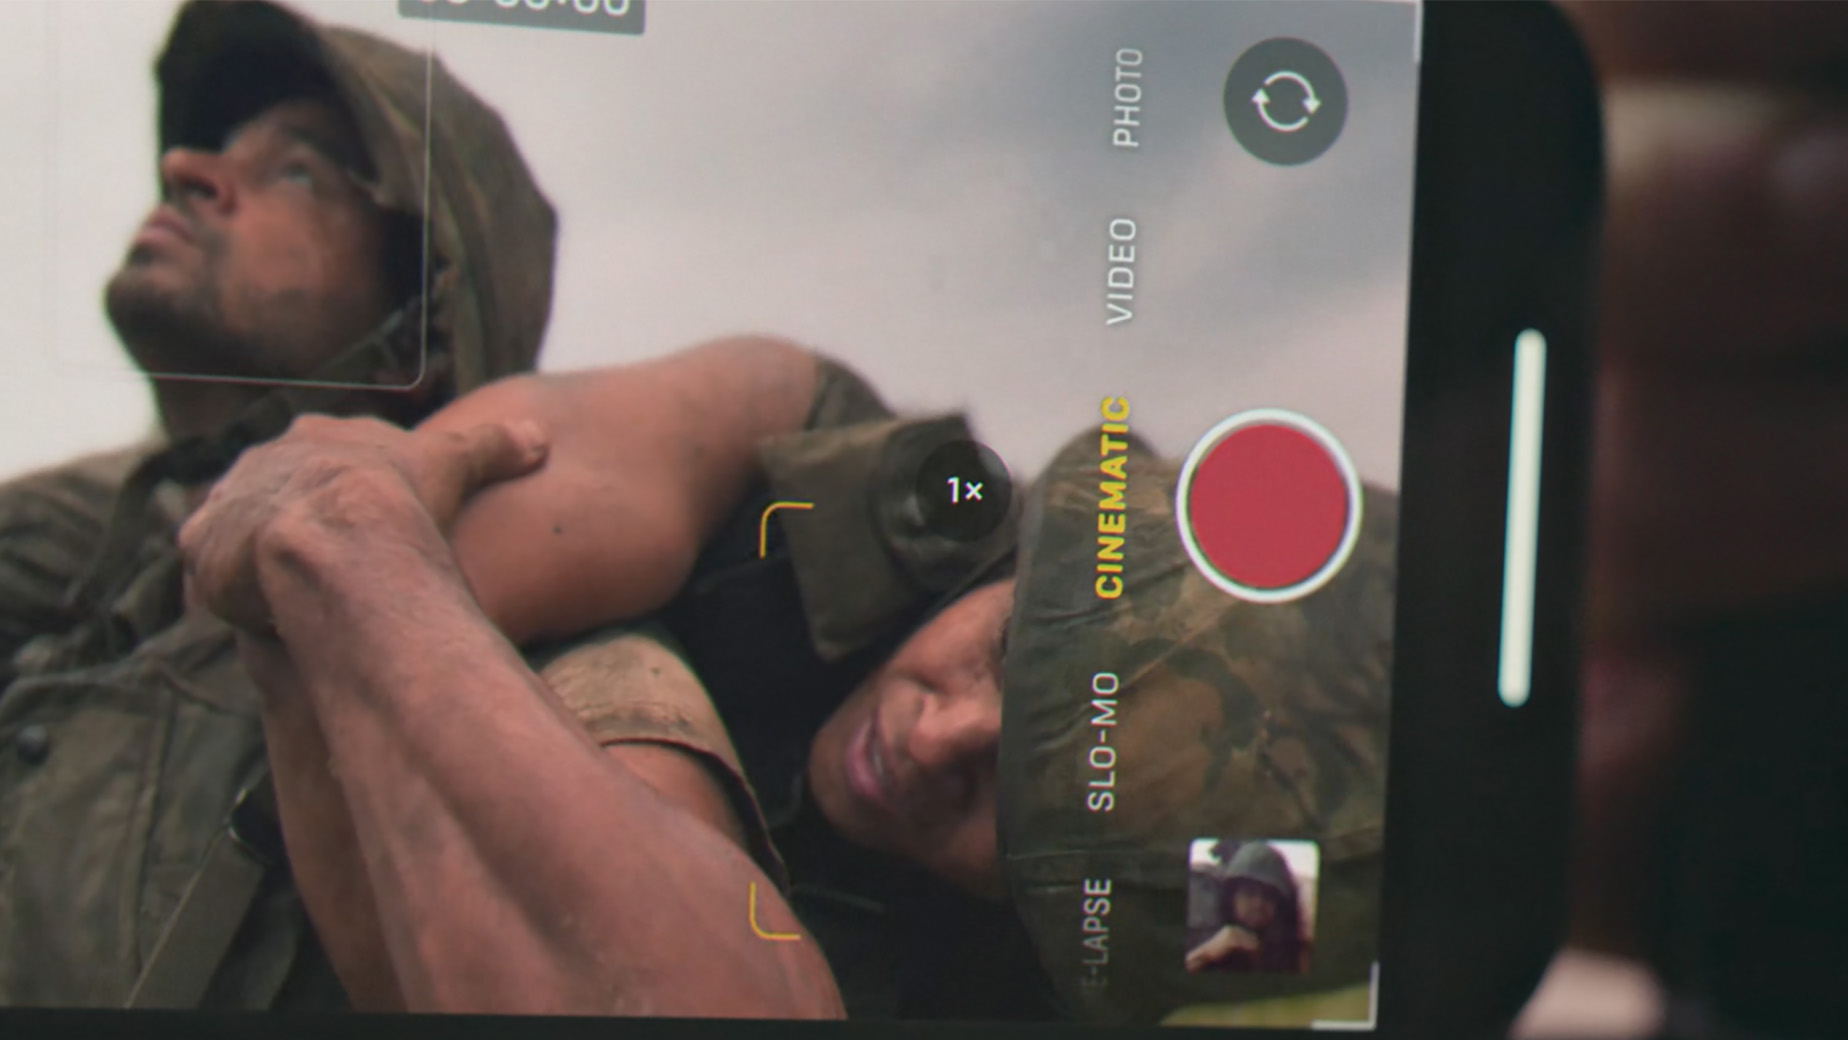 A phone showing a video of two soldiers in battle